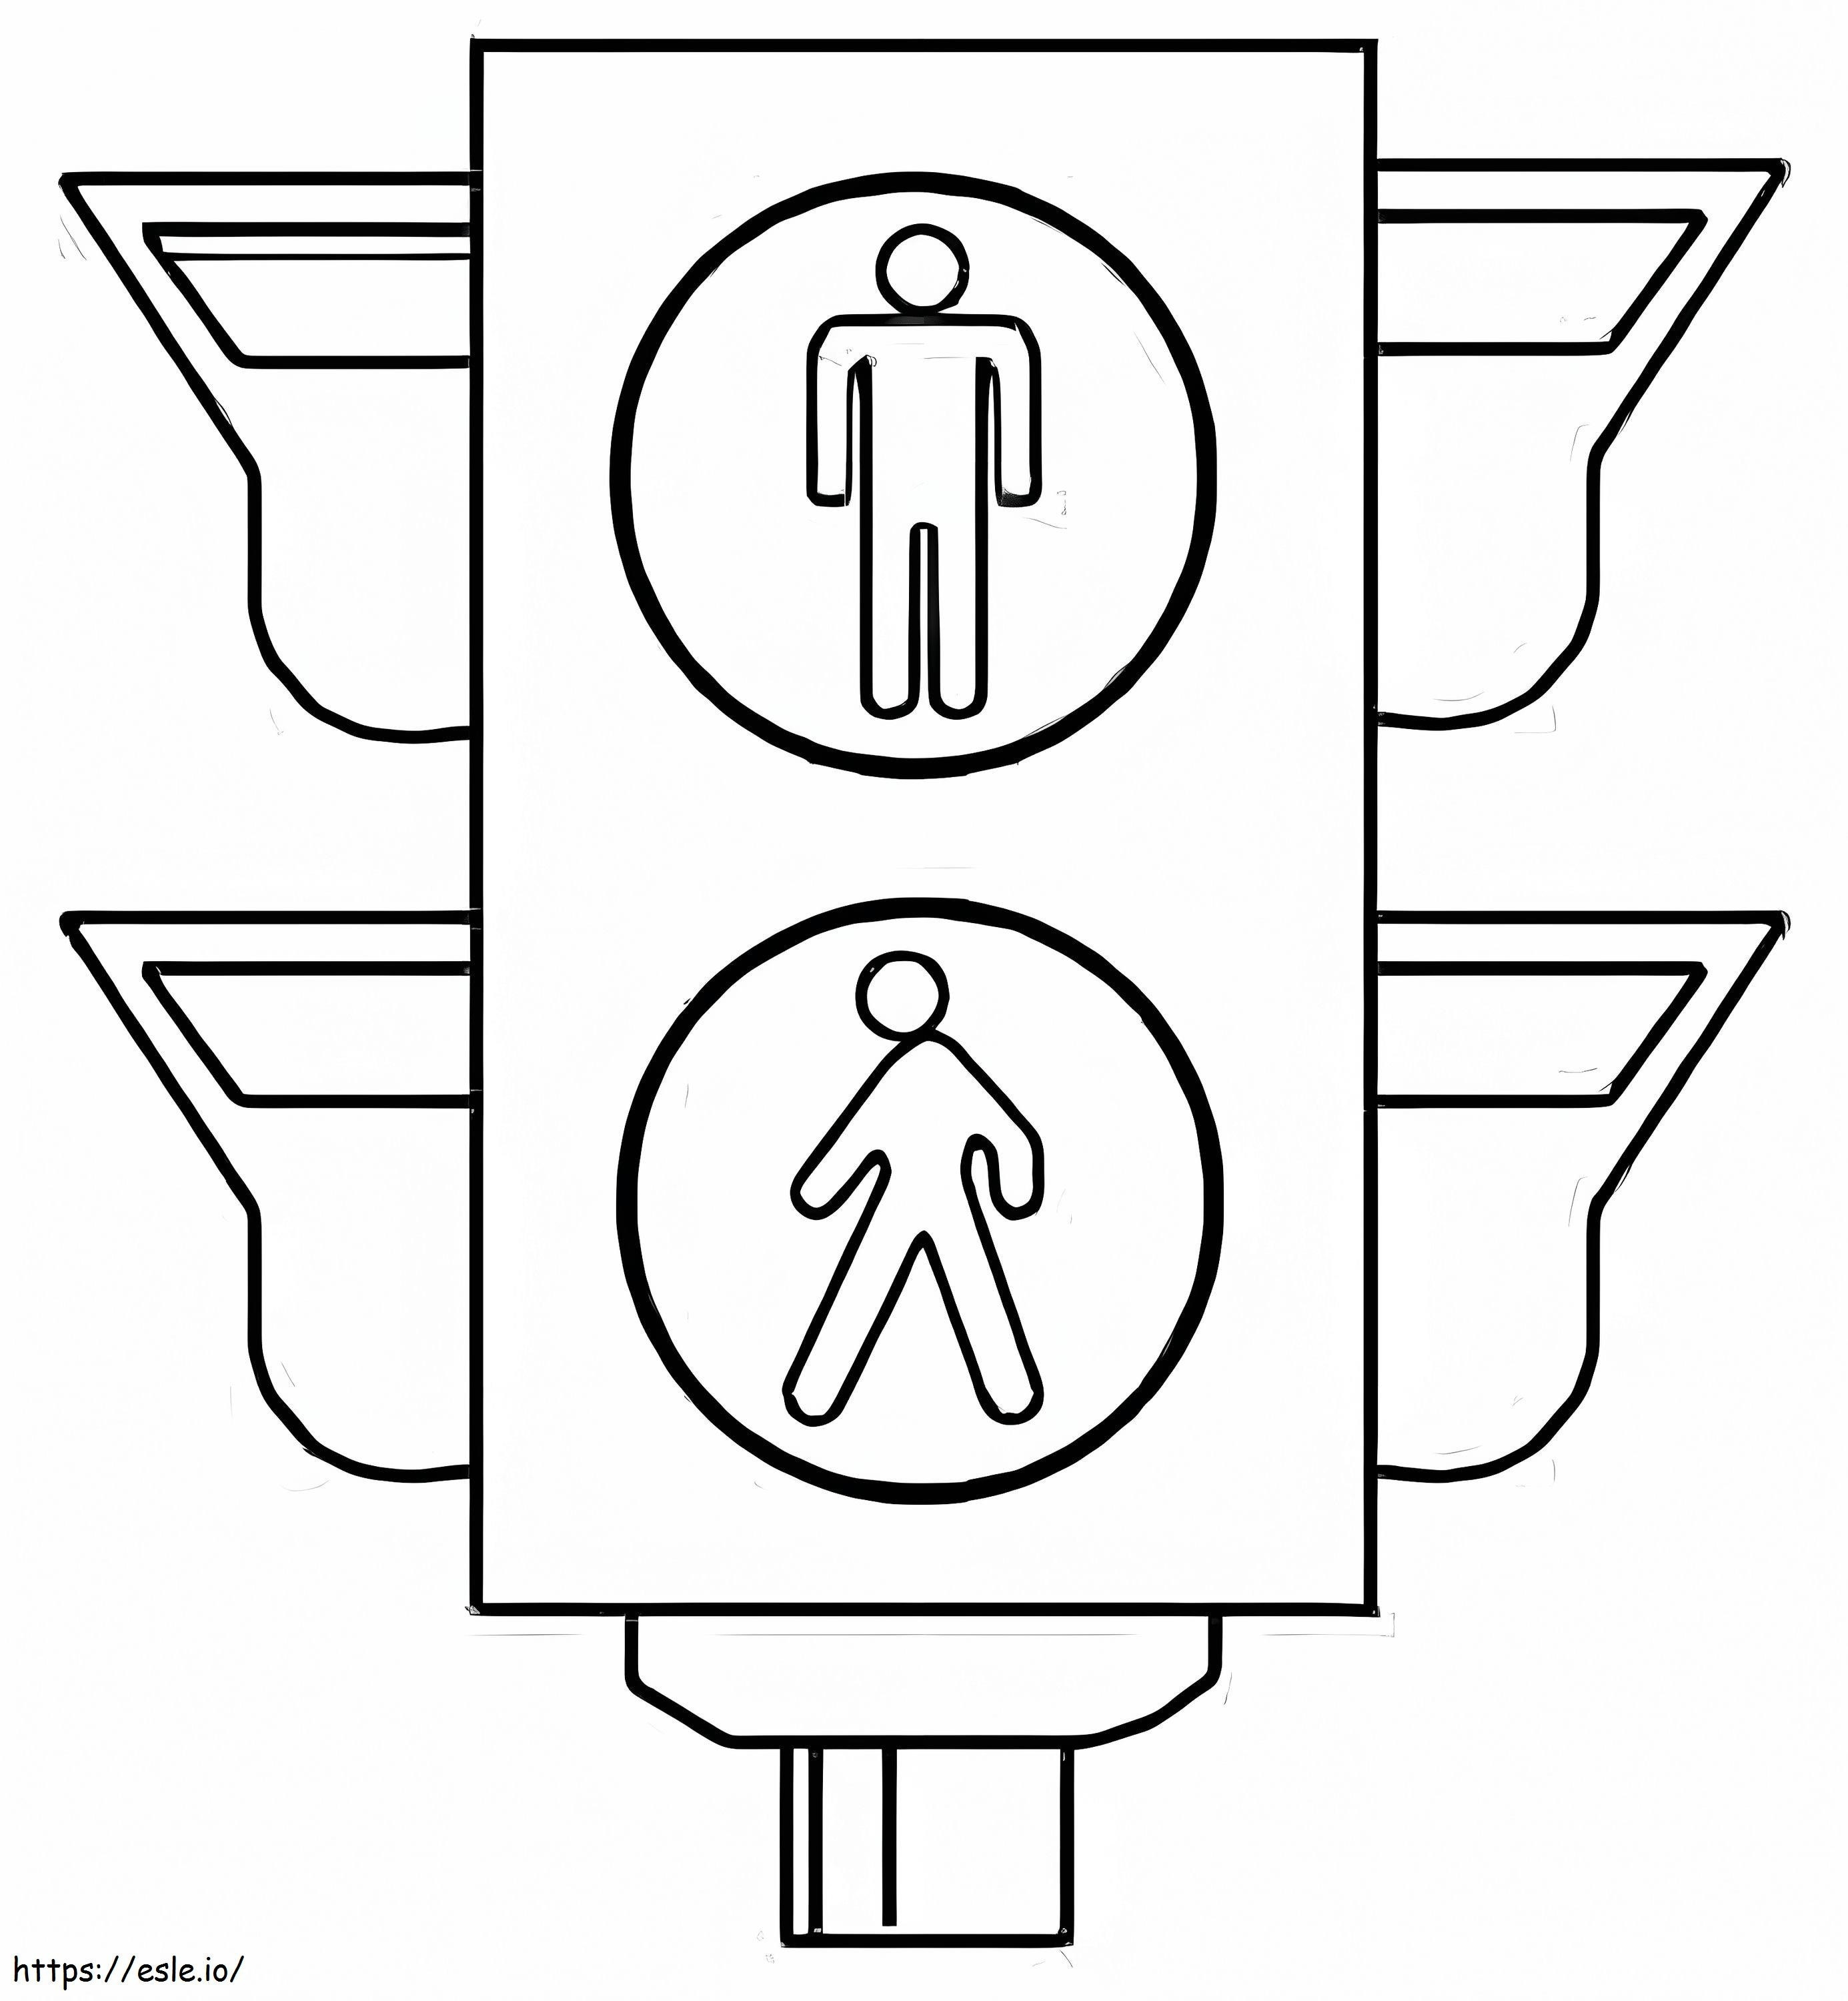 Print Traffic Light coloring page